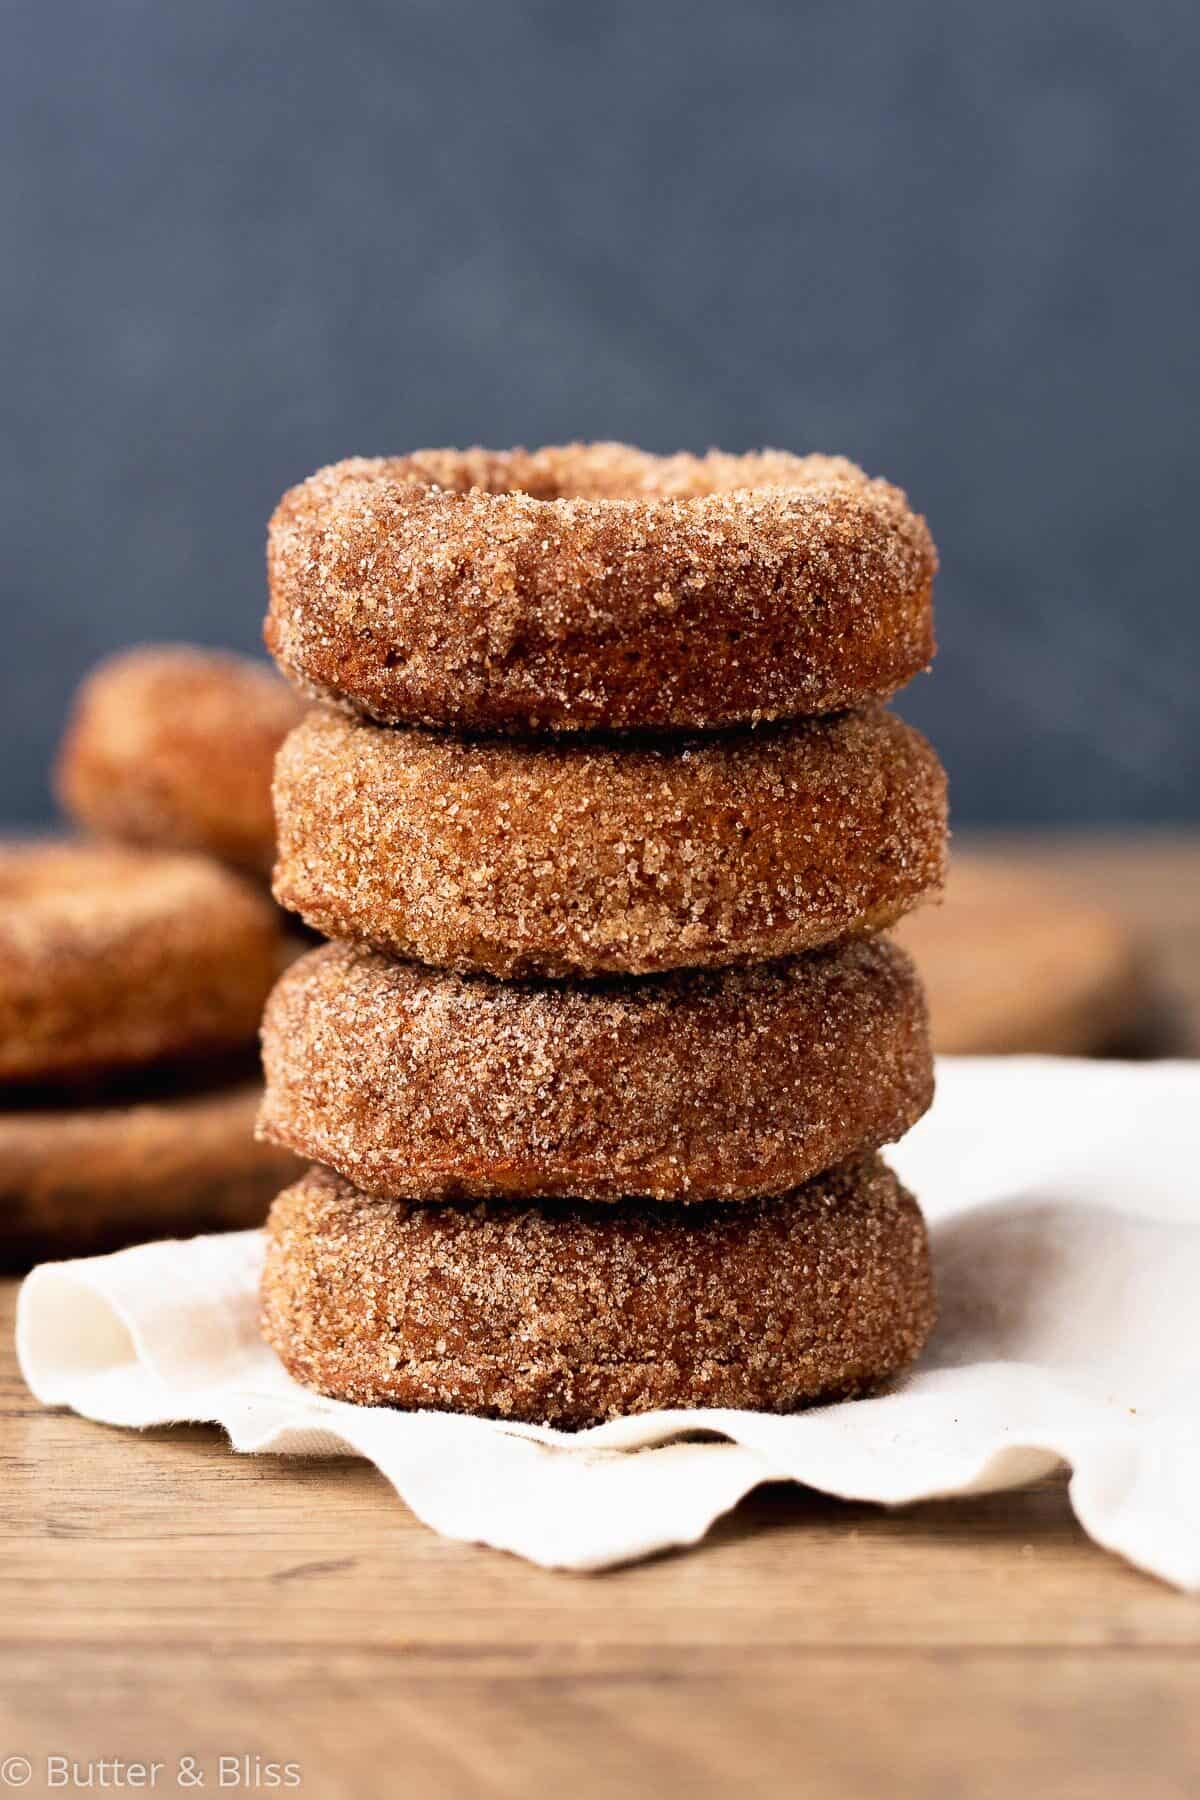 Apple cider donuts in a stack on a table.